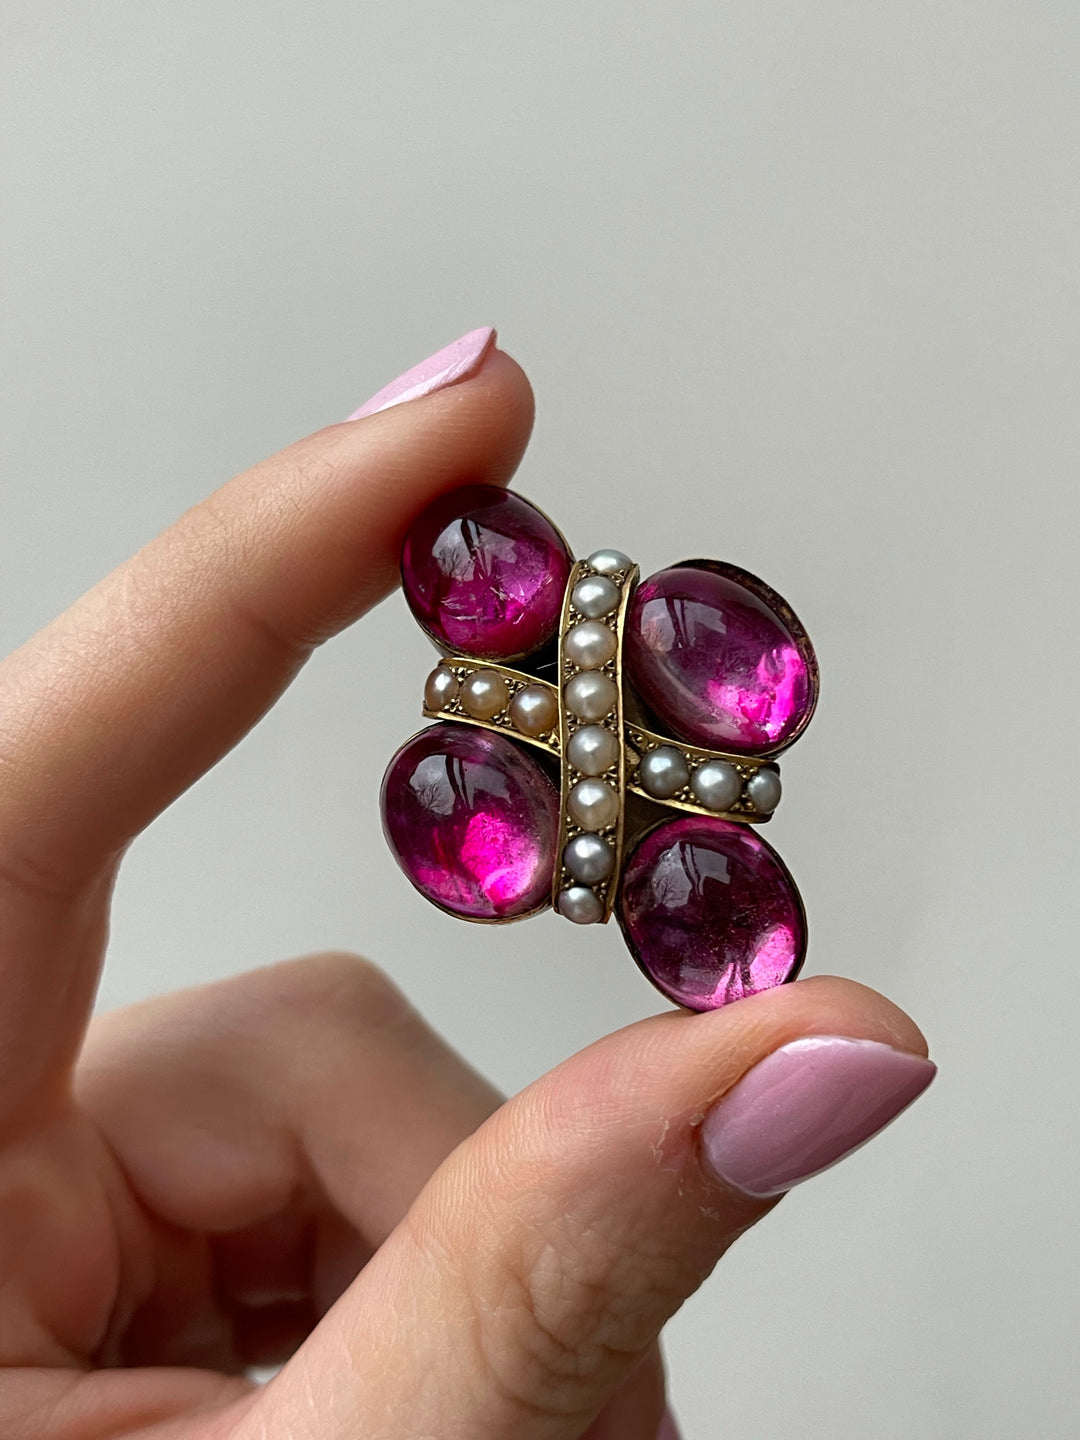 Victorian Vivid Pink Foiled Rock Crystal Brooch in 15k with Pearls